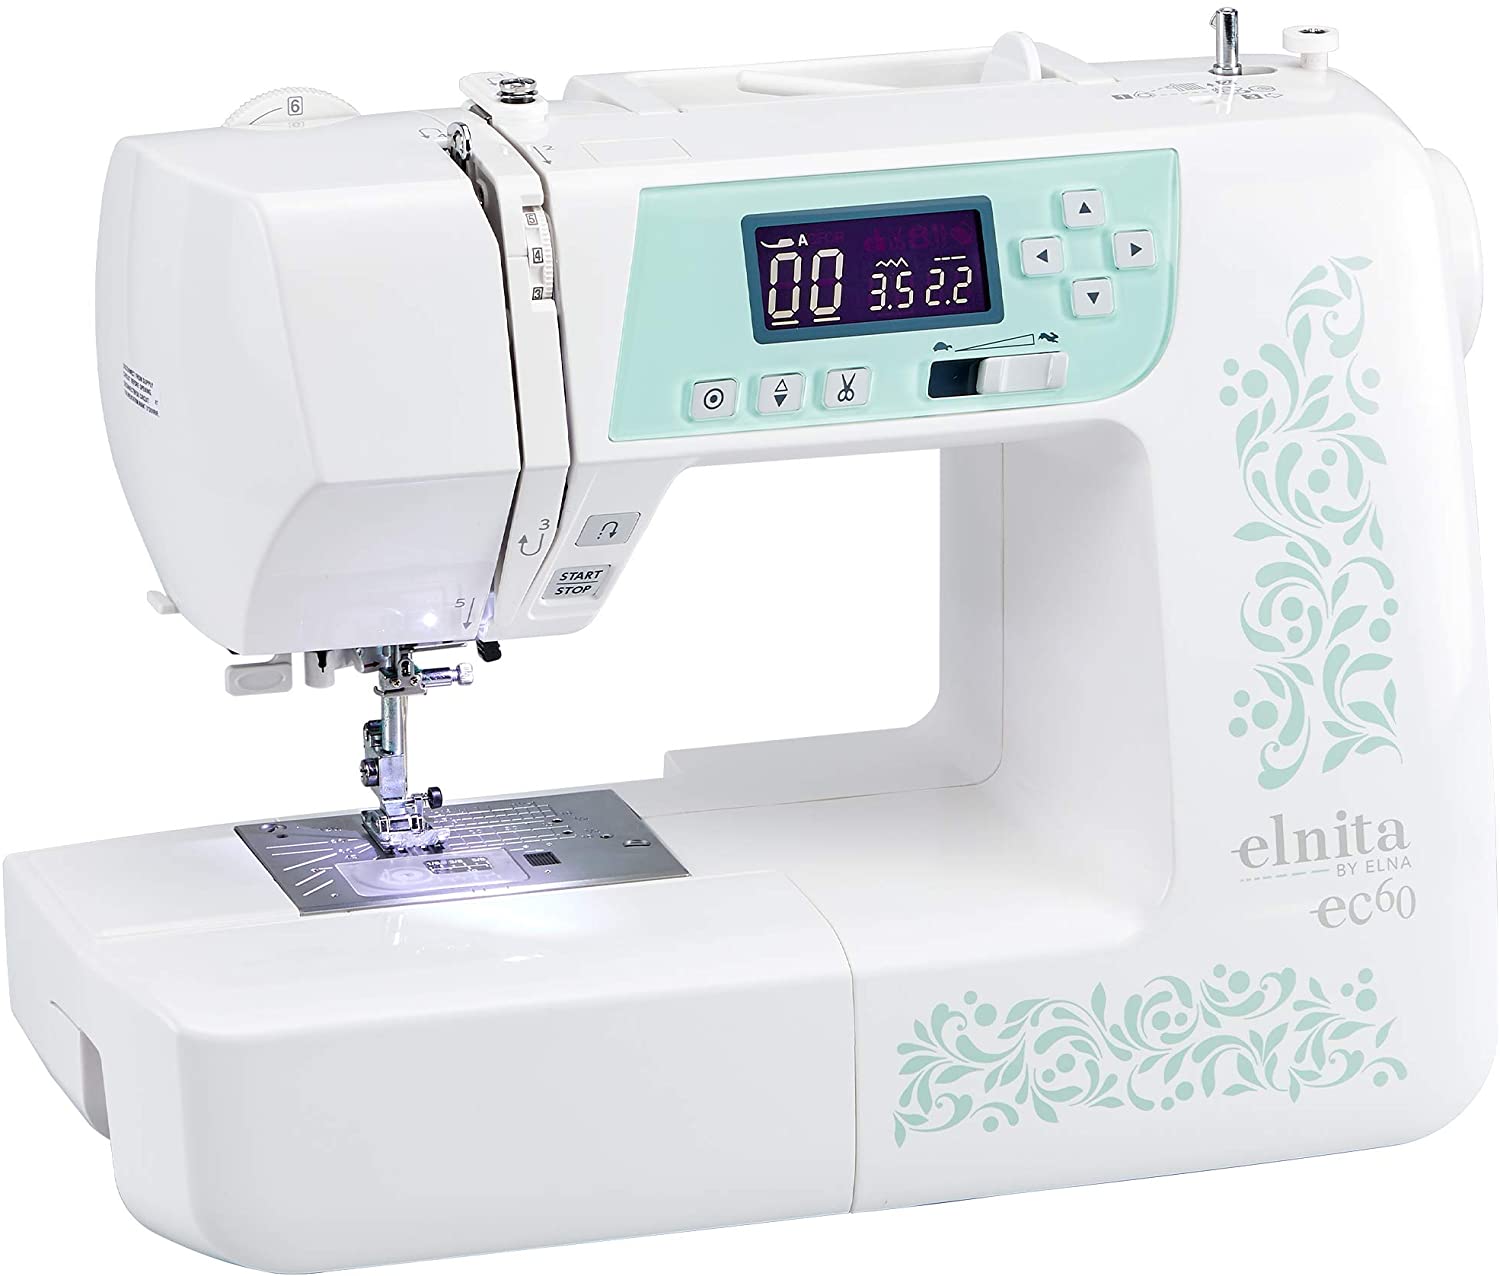 The Best Elna Sewing Machines for Every Type - Premier Stitching